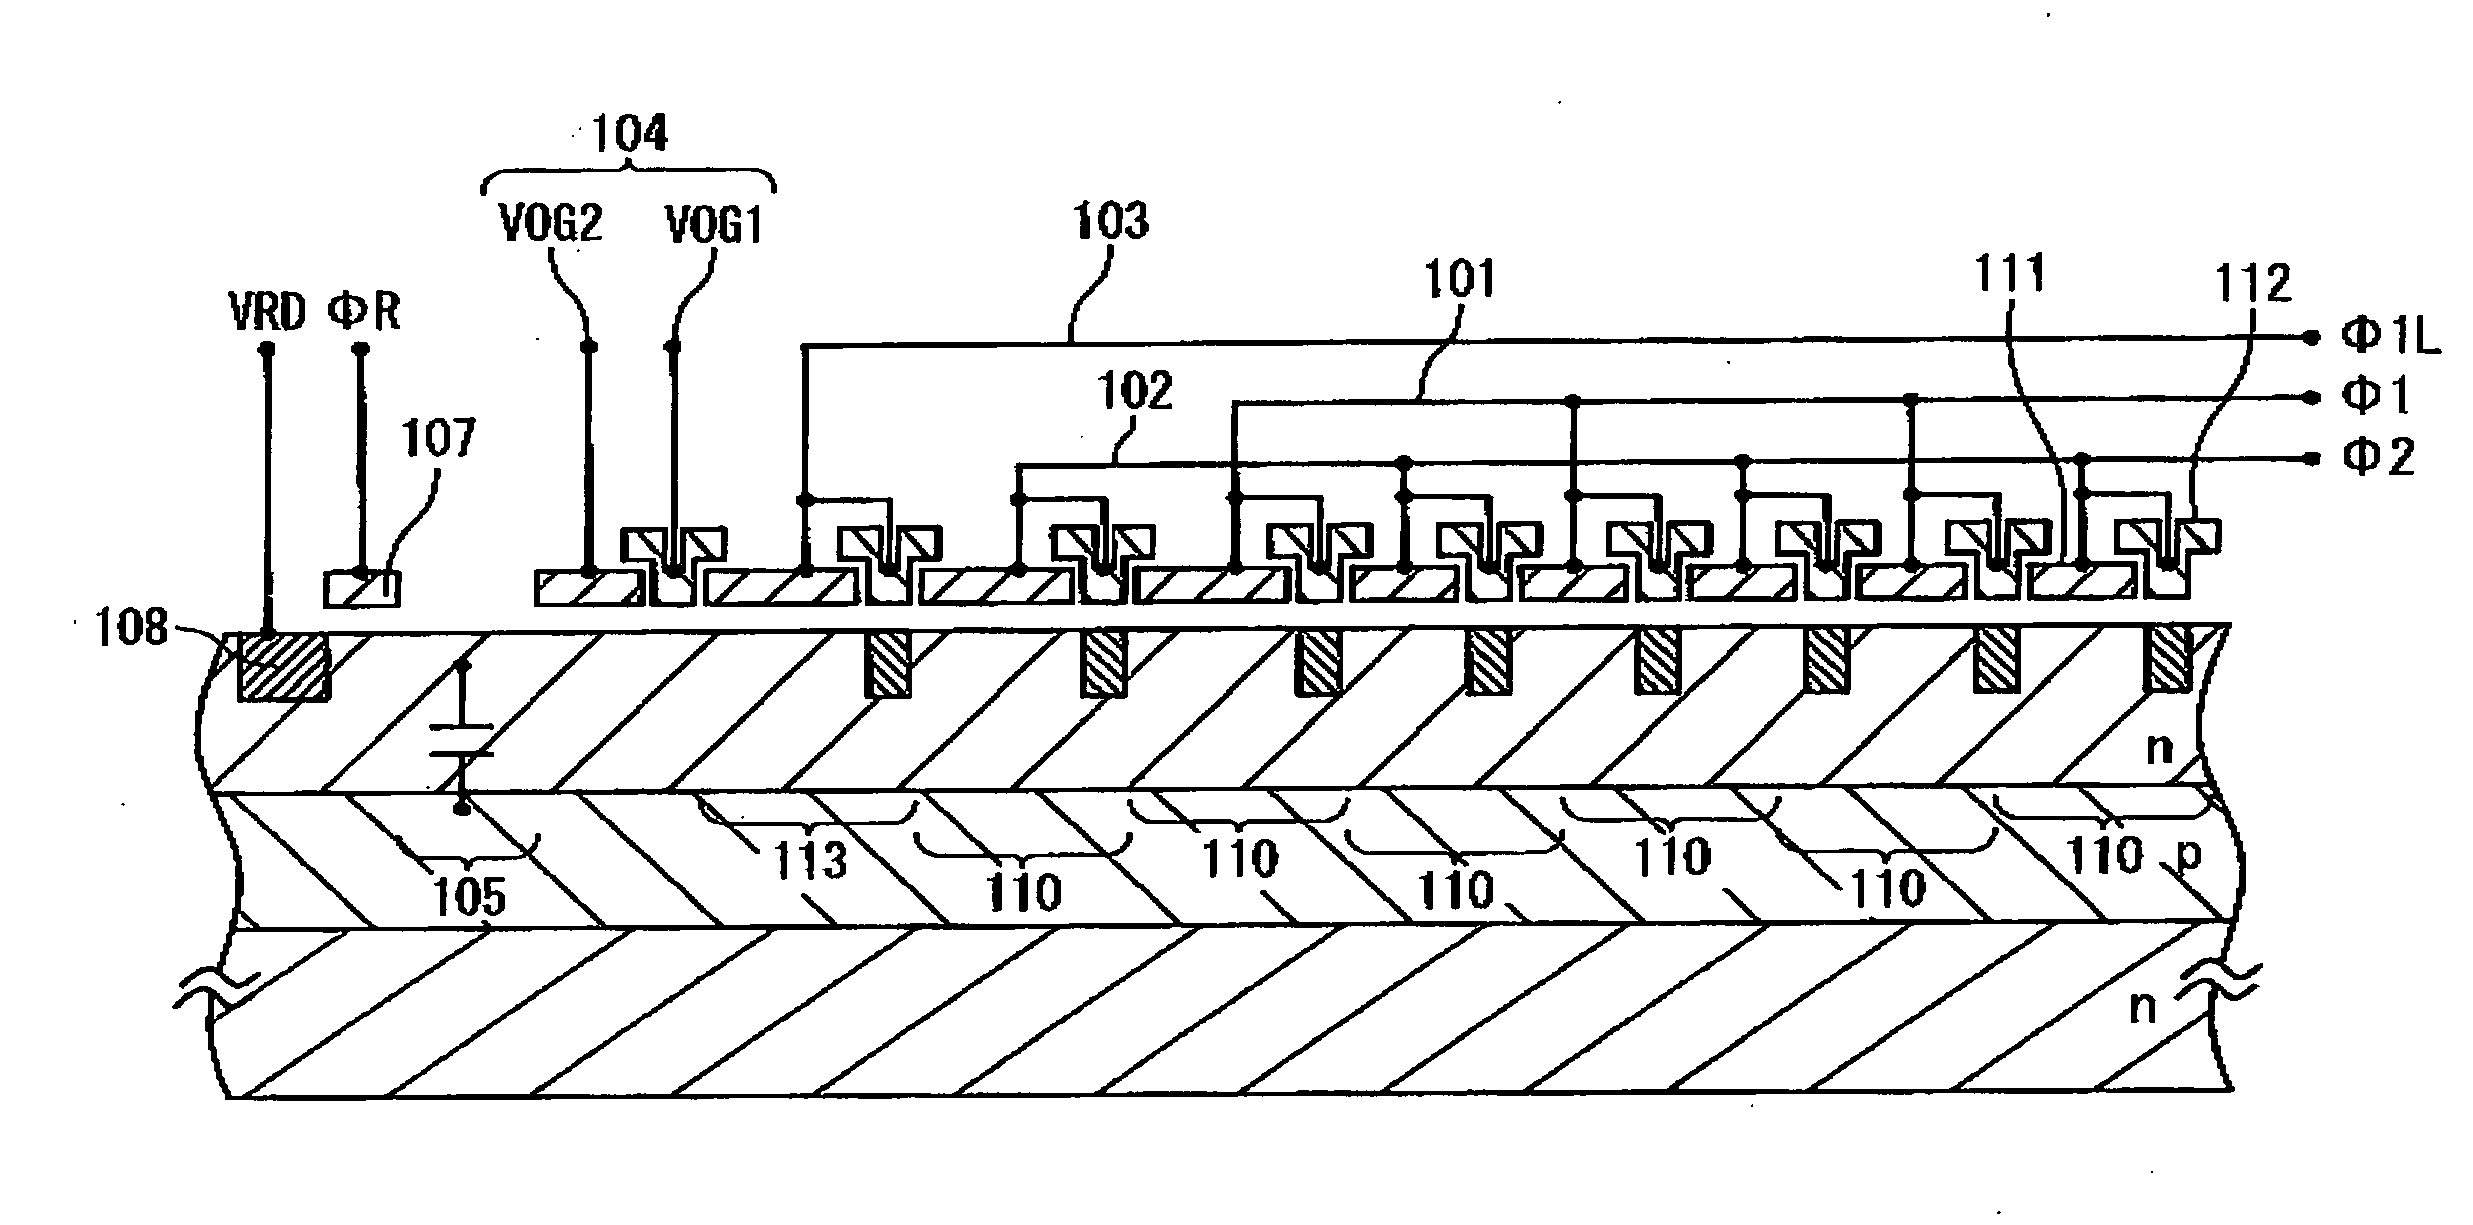 Solid-state image sensing device and method of operating the same